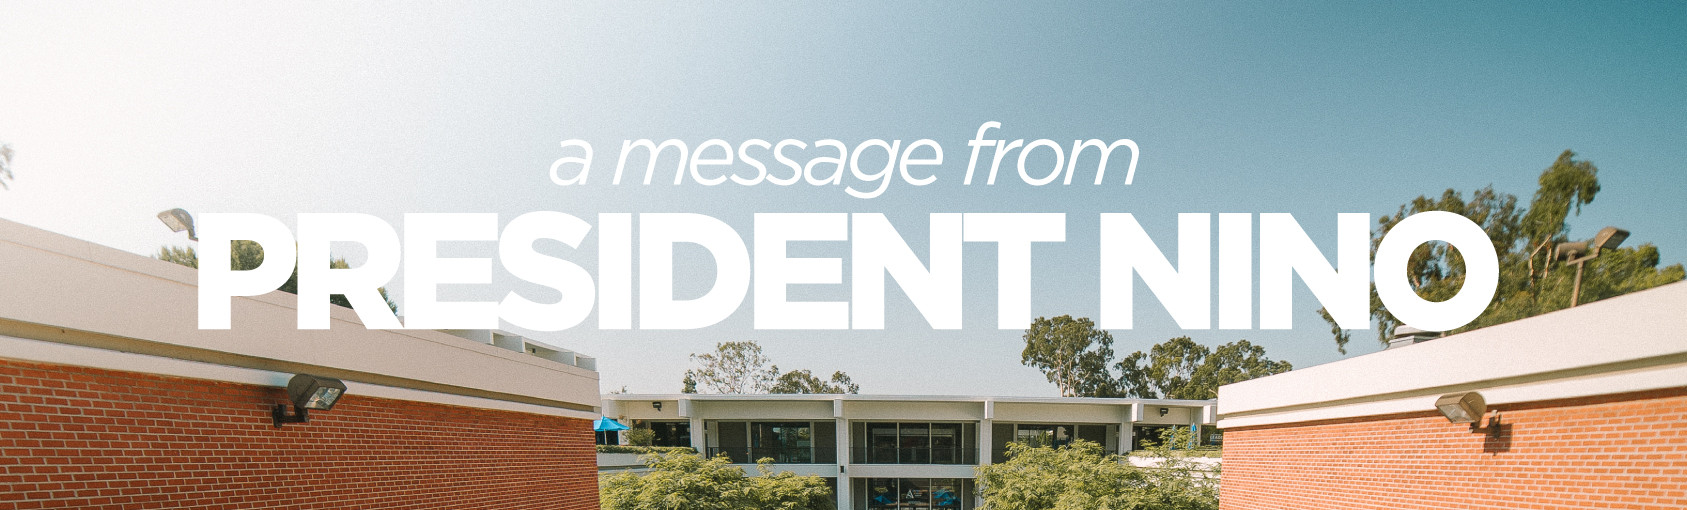 A Message from President Nino banner